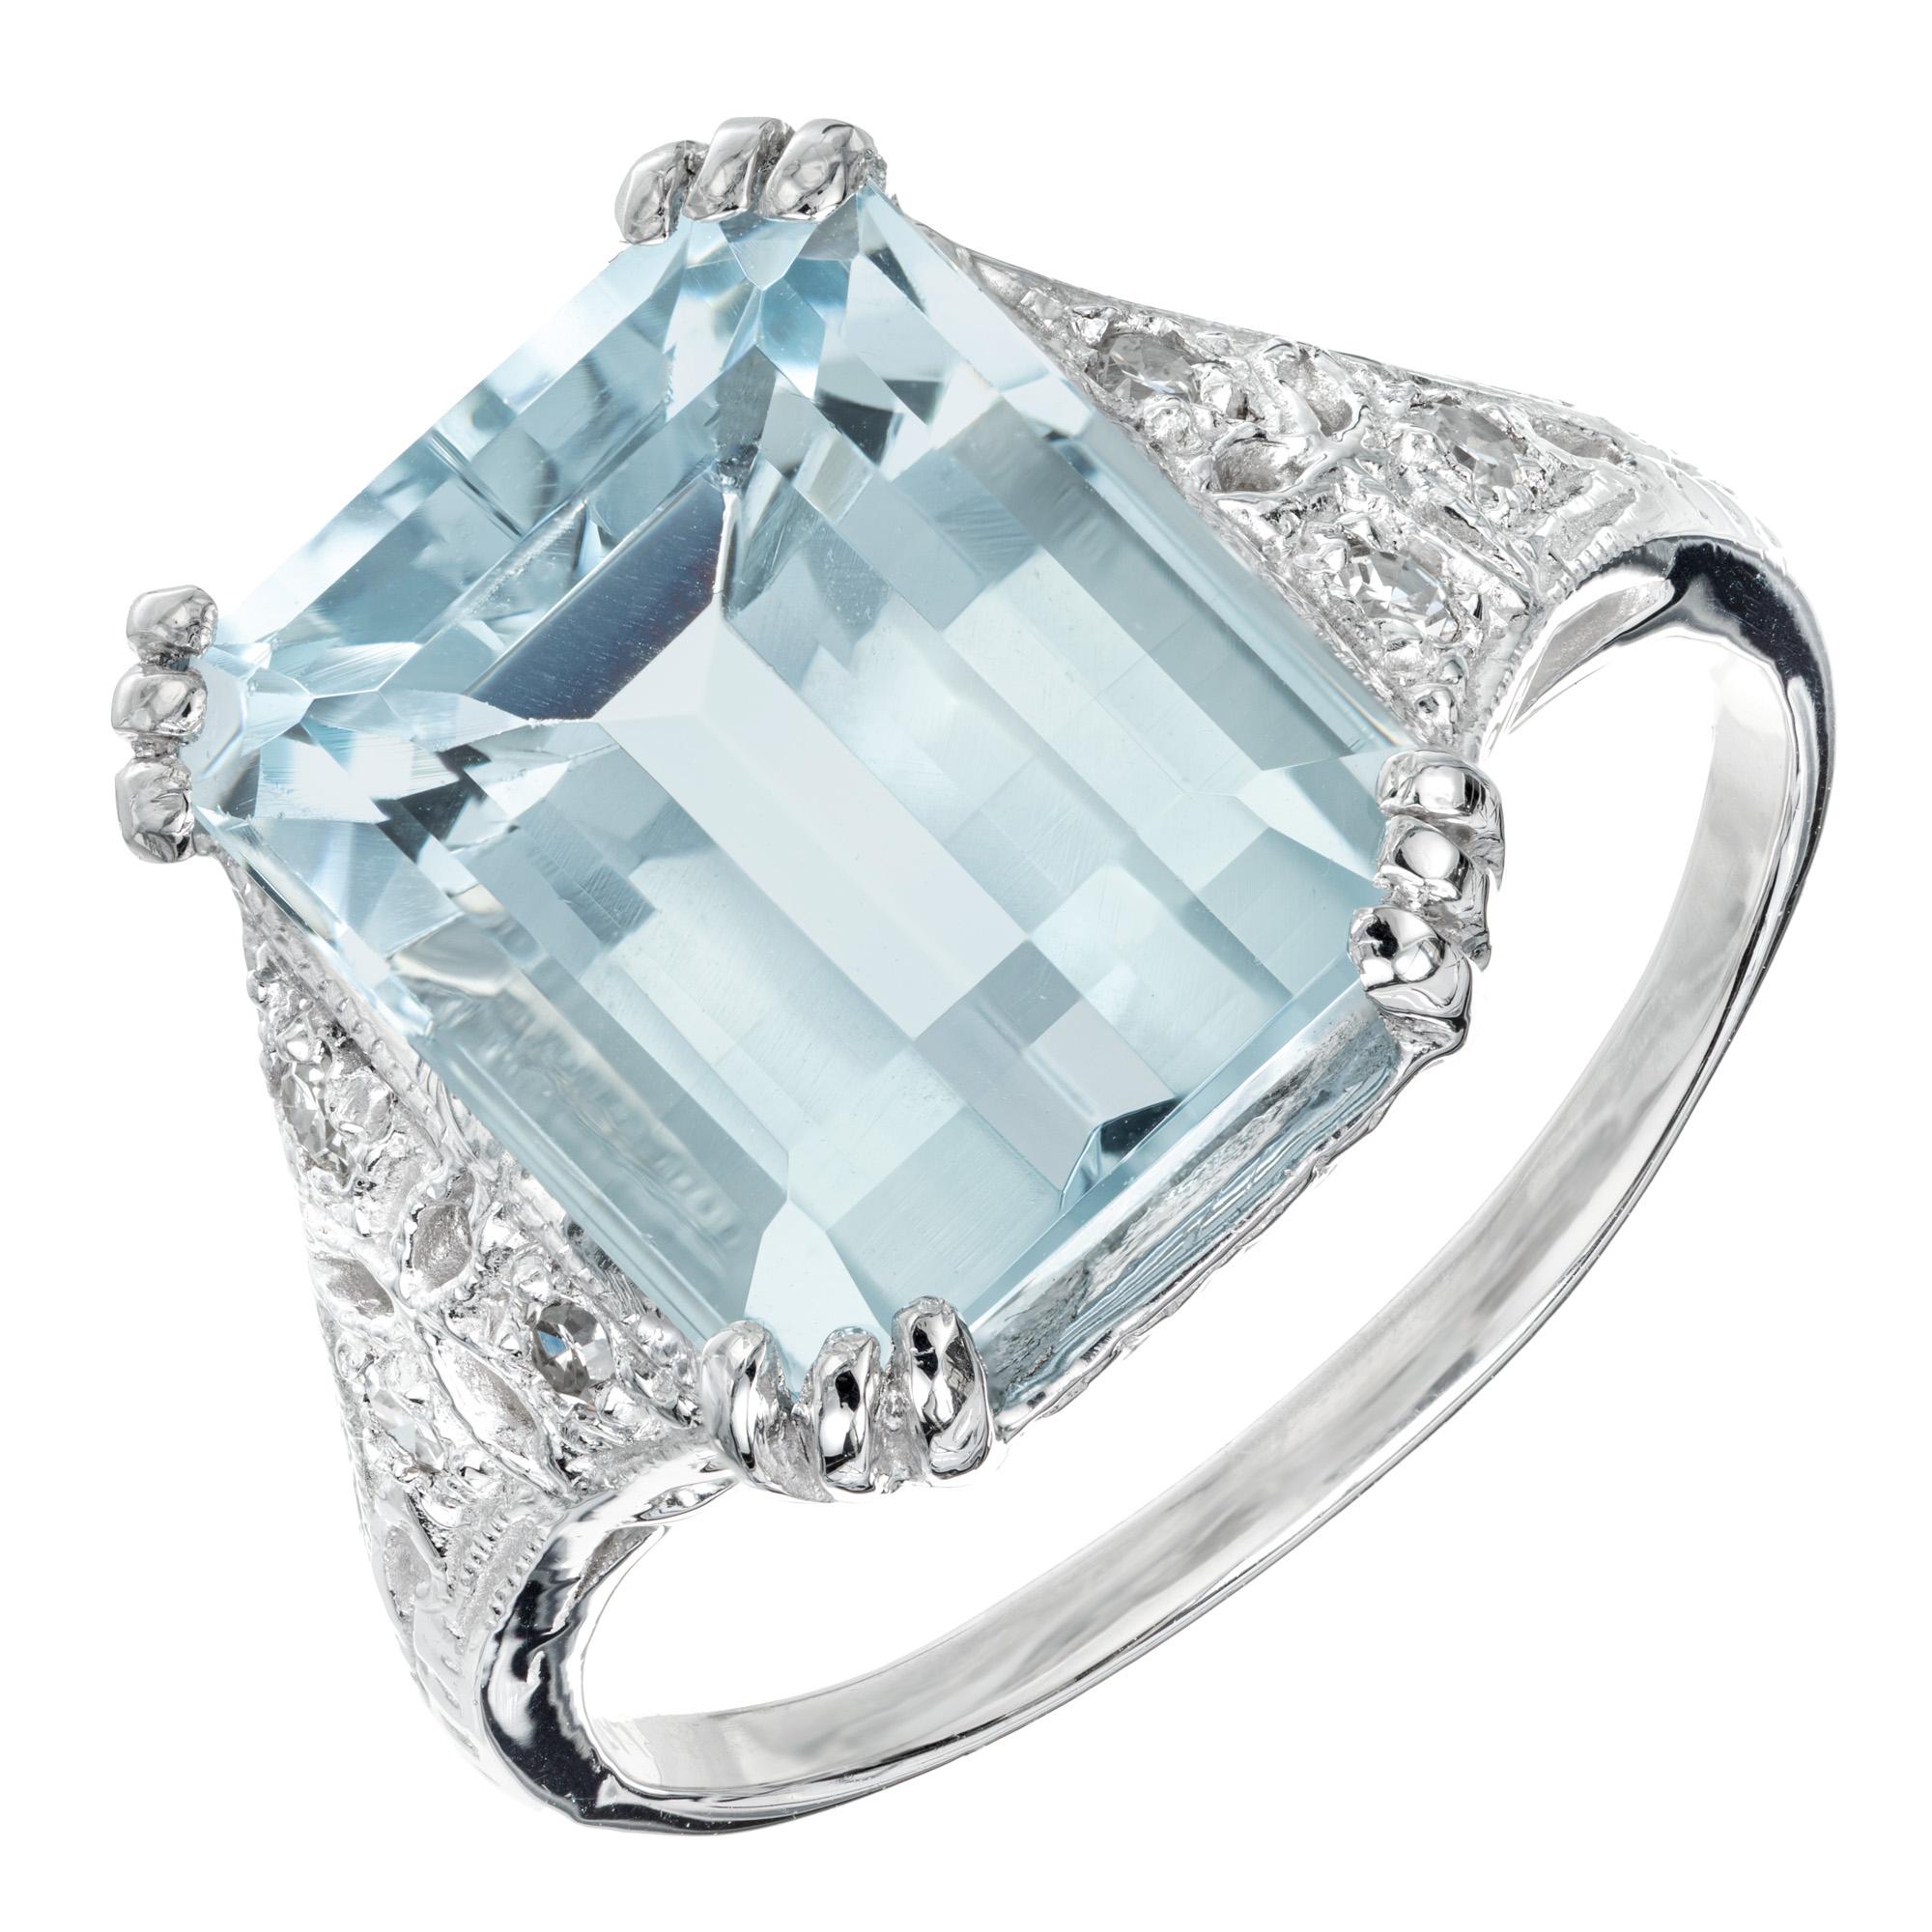  Art Deco 1920s aquamarine and diamond ring. 6.25 emerald cut center stone with 6 single cut accent diamonds, three on each side of the pierced and engraved platinum setting. 

1 Emerald cut bright light blue Aquamarine, approx. total weight